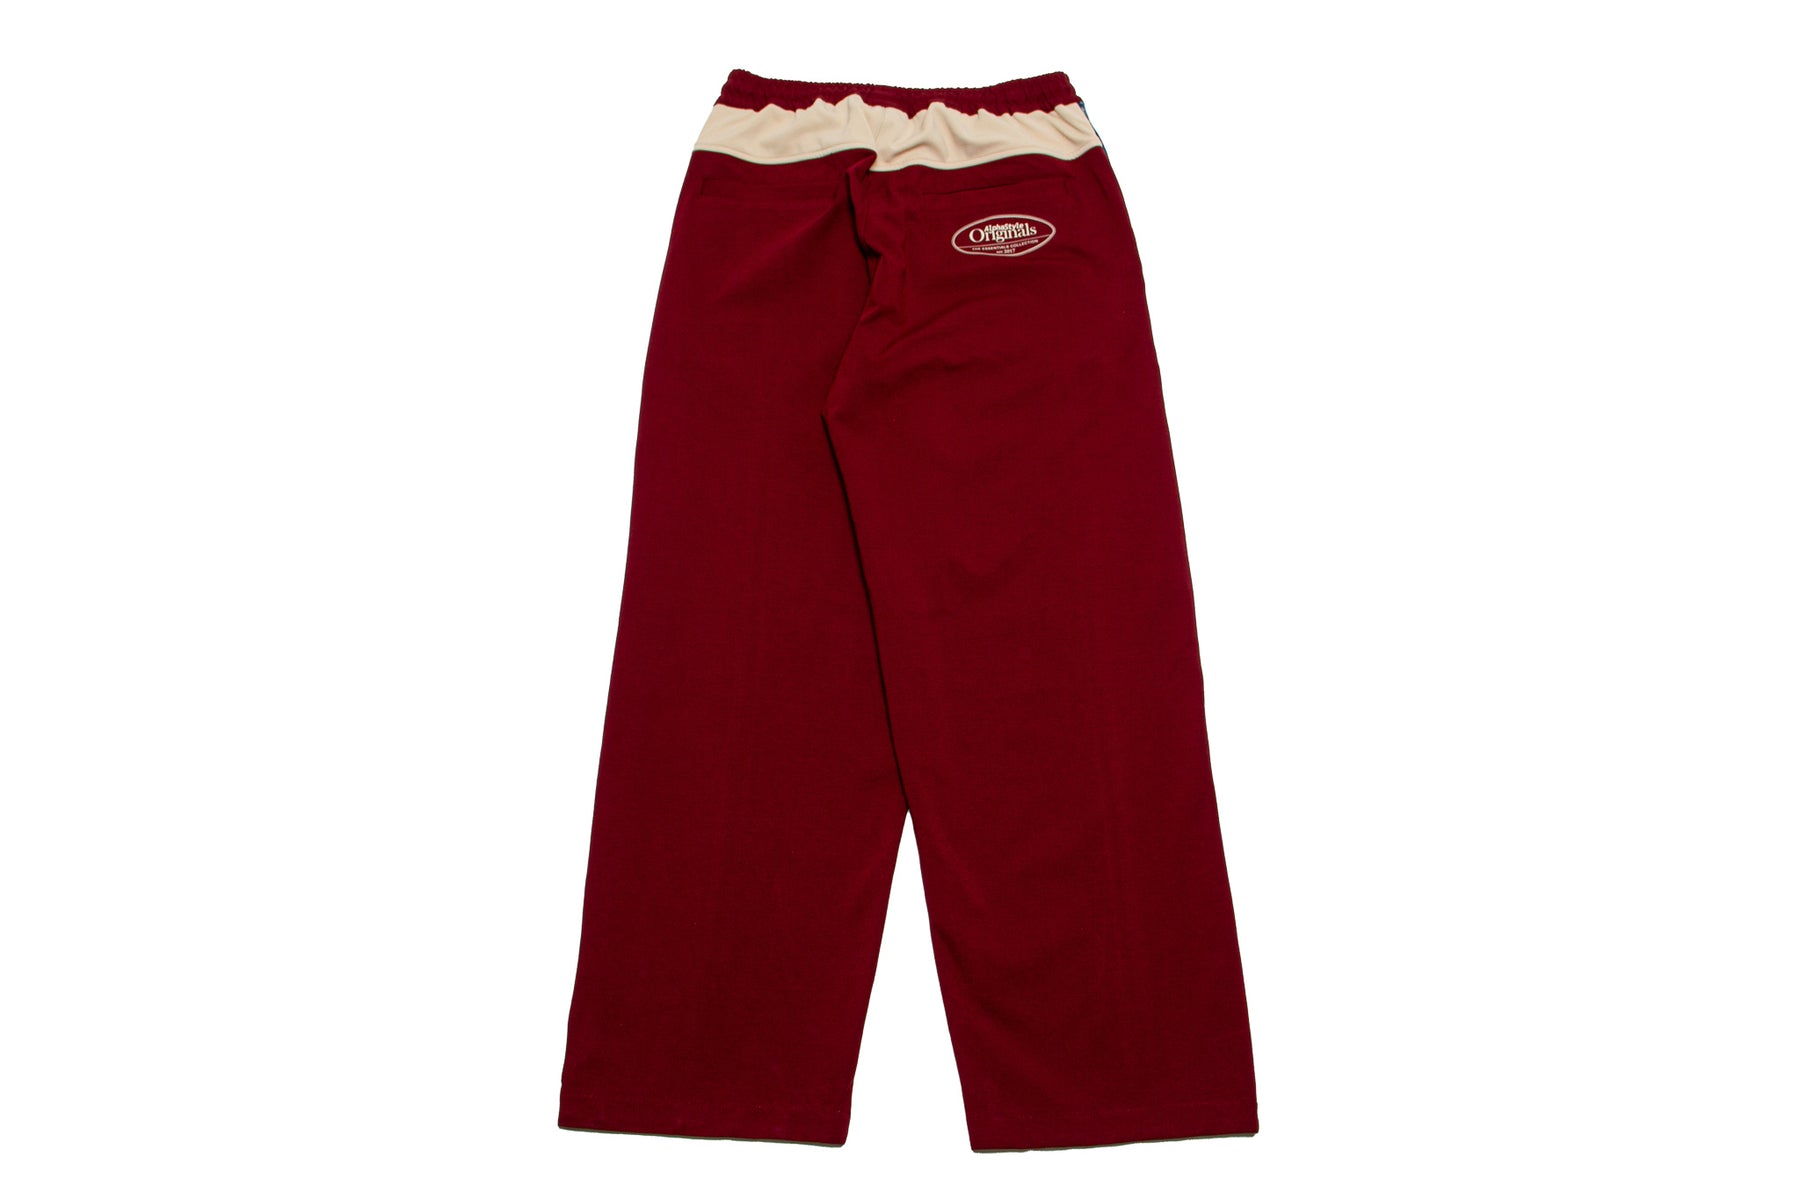 AlphaStyle Chase Track Pants "Wine"